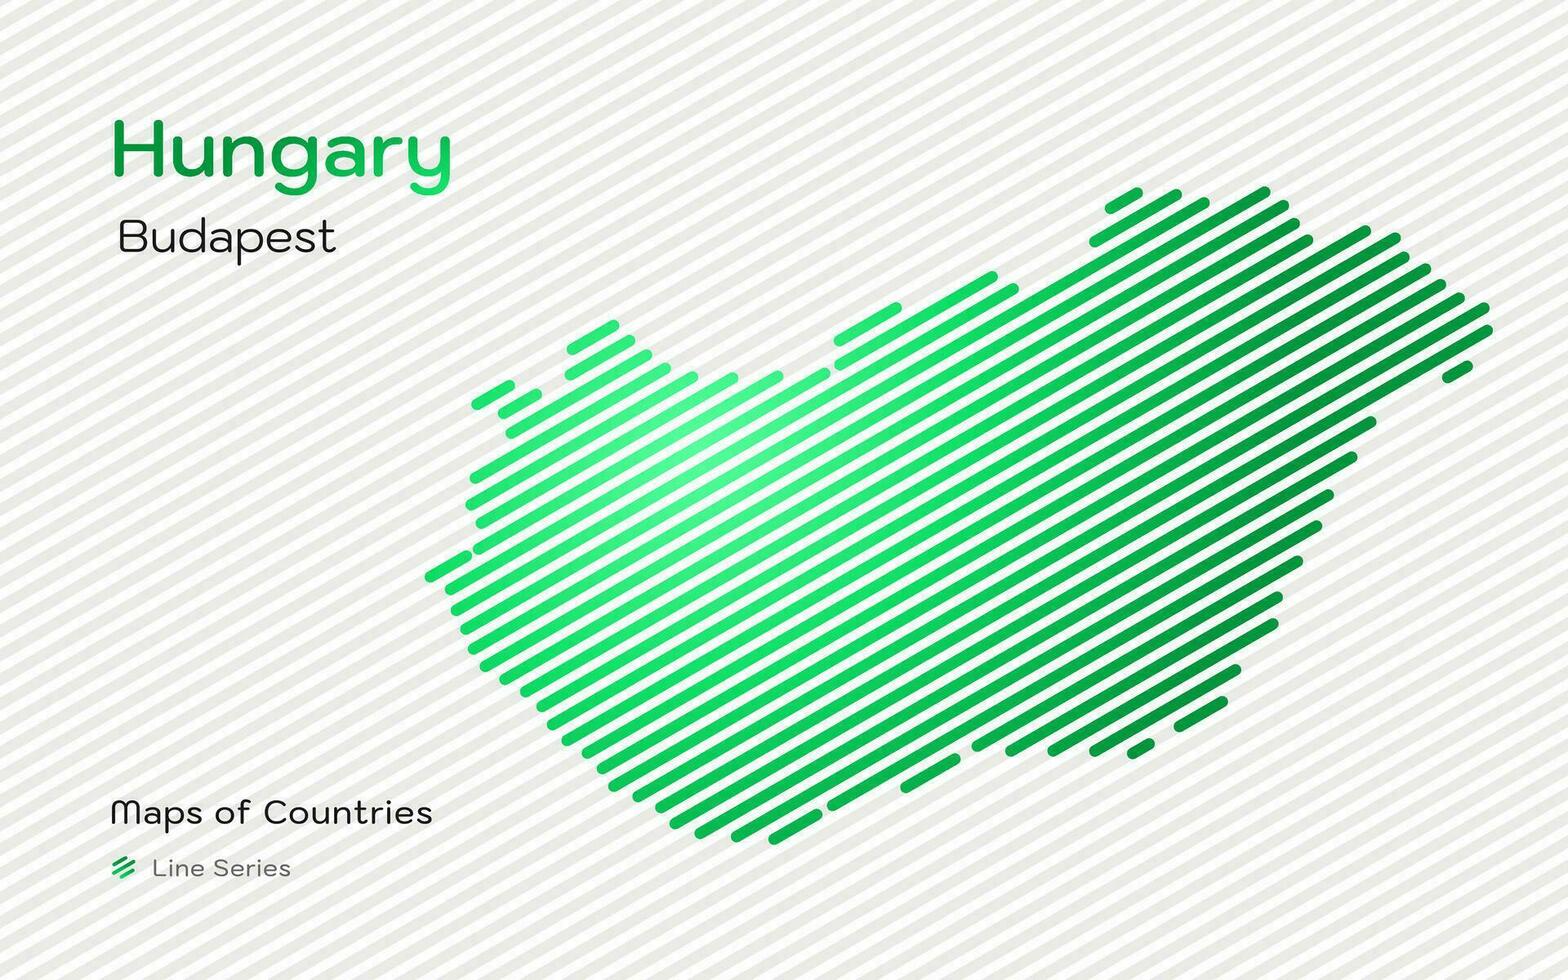 Hungary Map in a Line Pattern. Stylized simple vector map